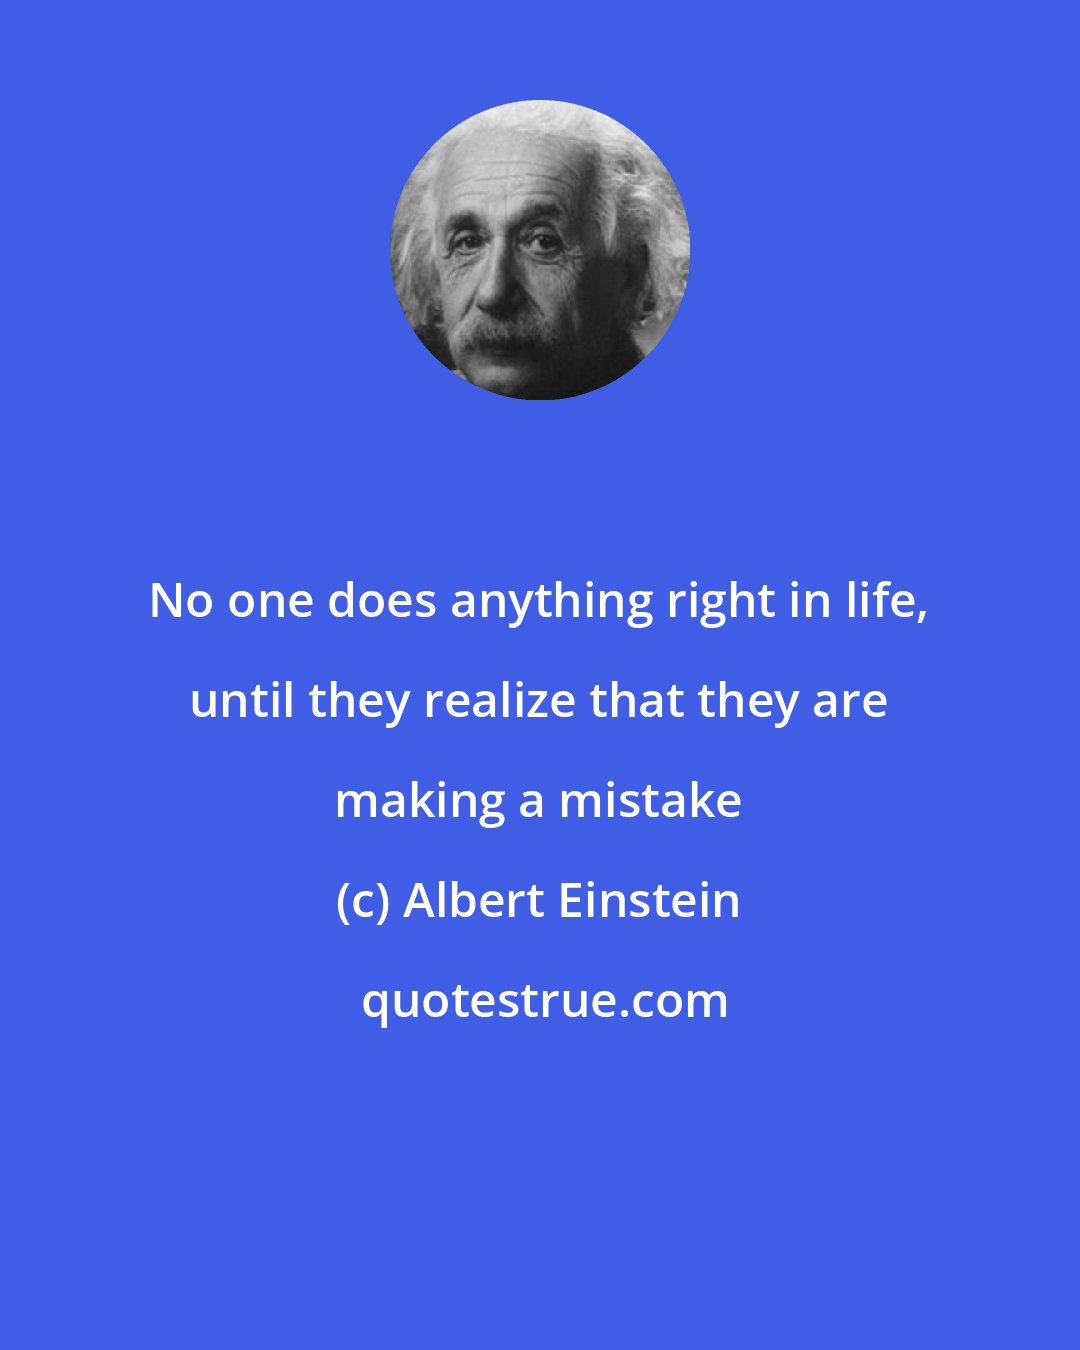 Albert Einstein: No one does anything right in life, until they realize that they are making a mistake